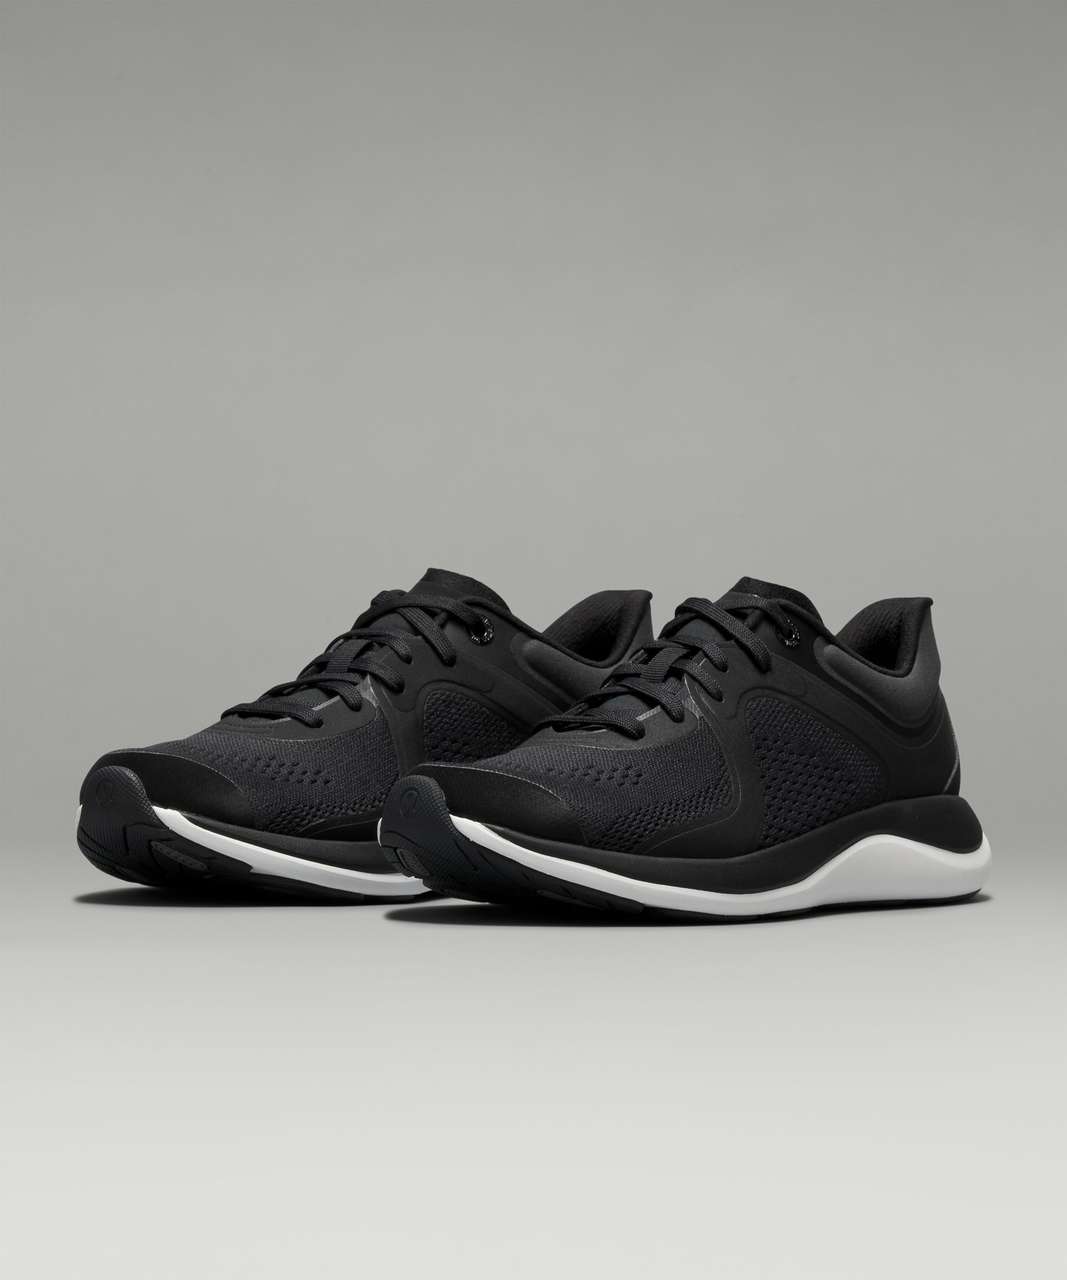 Lululemon Chargefeel Low Womens Workout Shoe - Black / White / Anchor